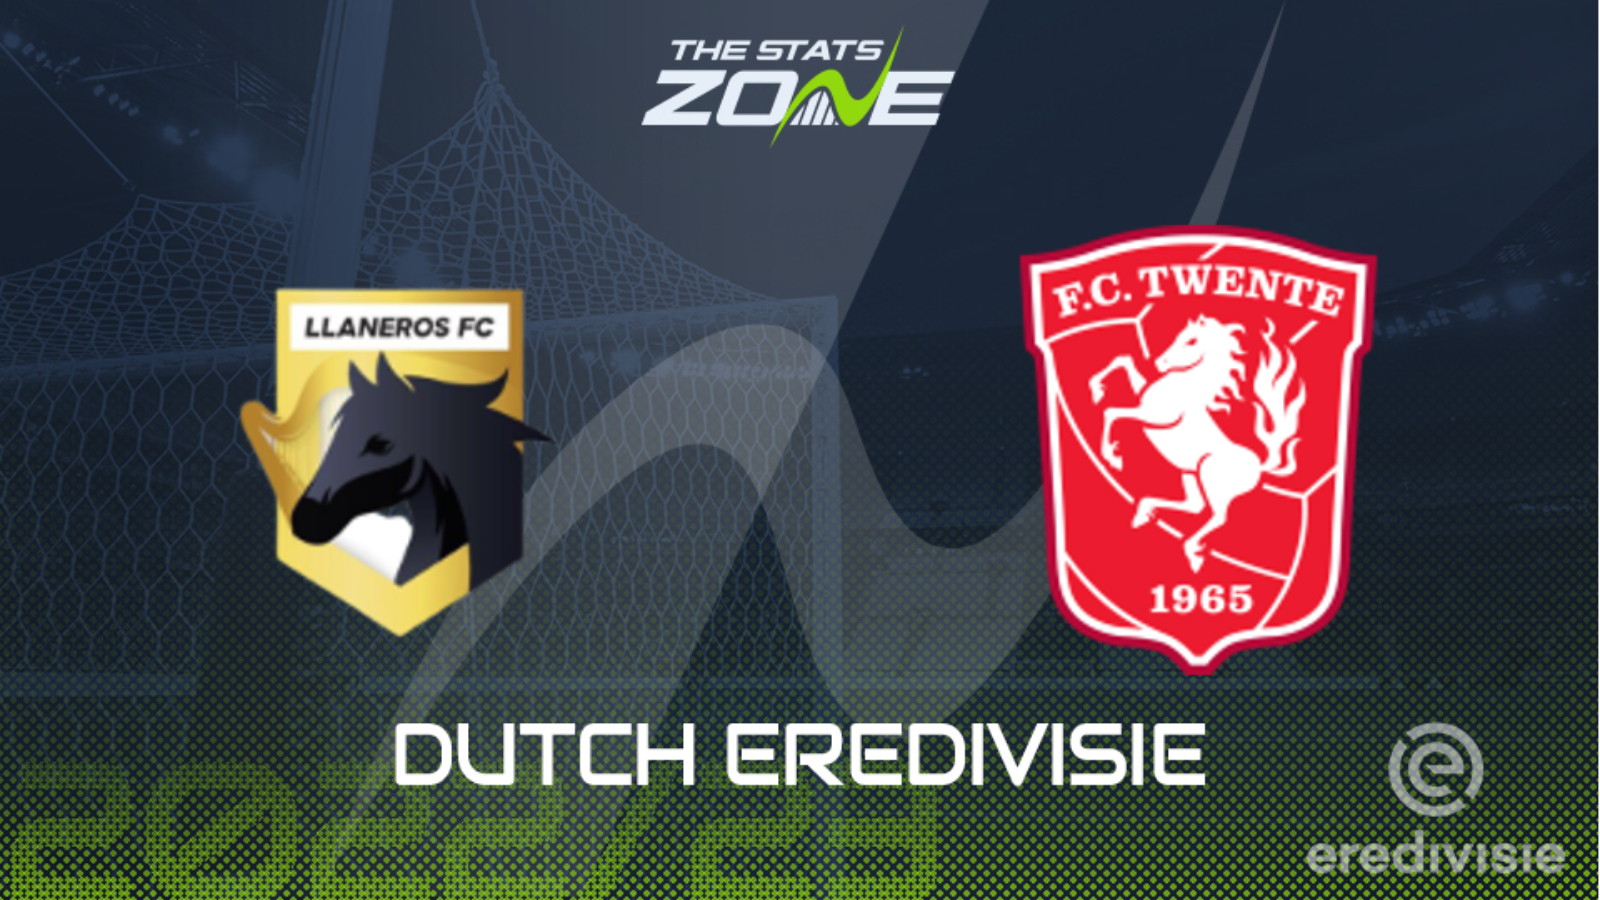 Nec nijmegen vs twente betting tips states you can sports bet in